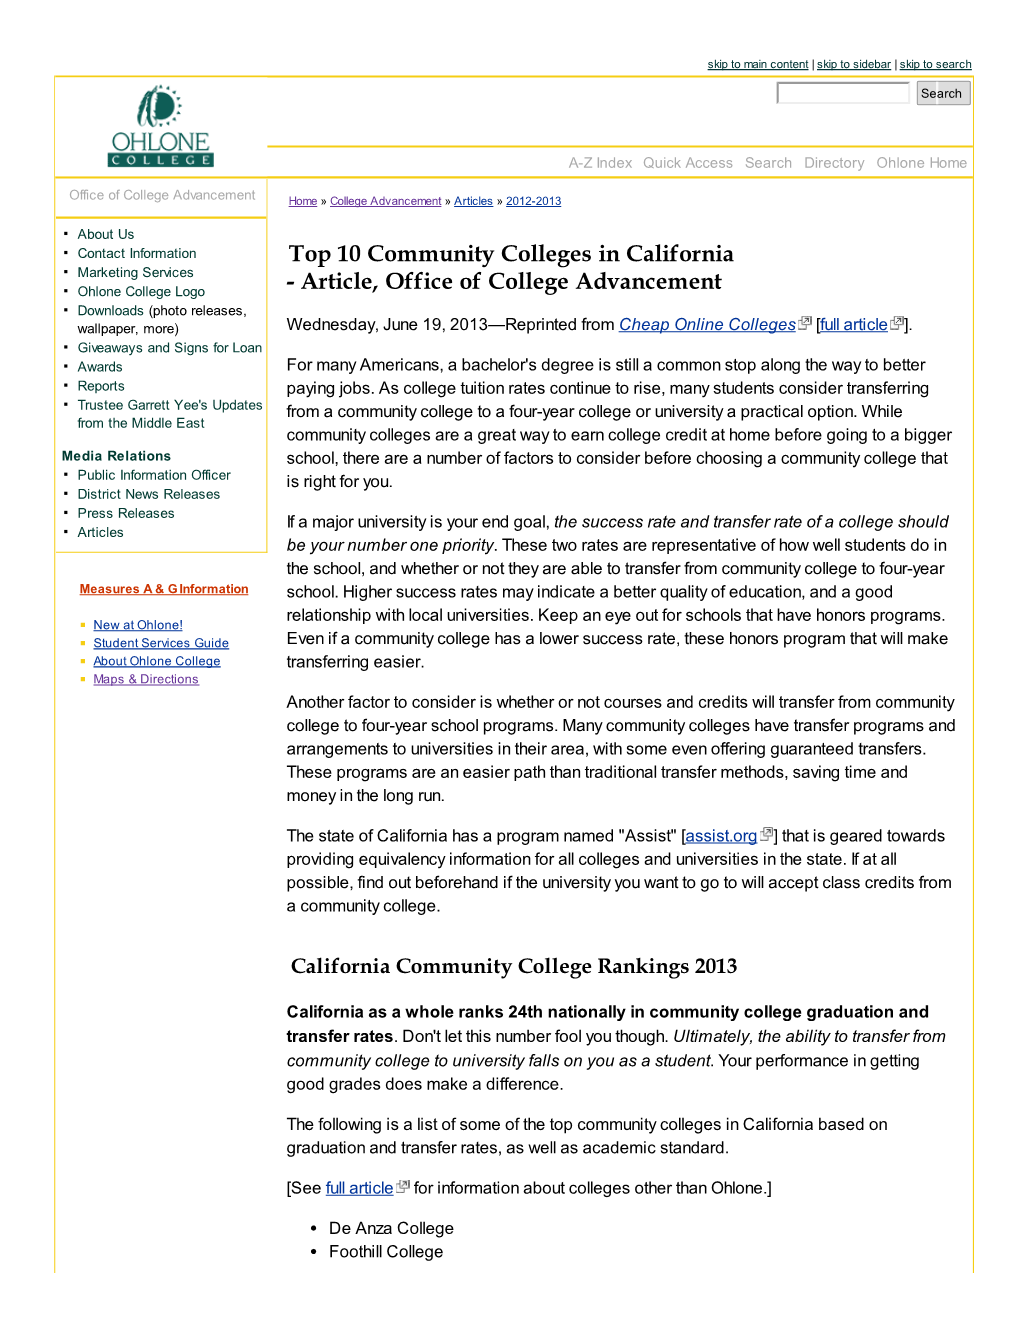 Top 10 Community Colleges in California, June 2013 | Articles, College Advancement - Ohlone College, Fremont and Newark, California